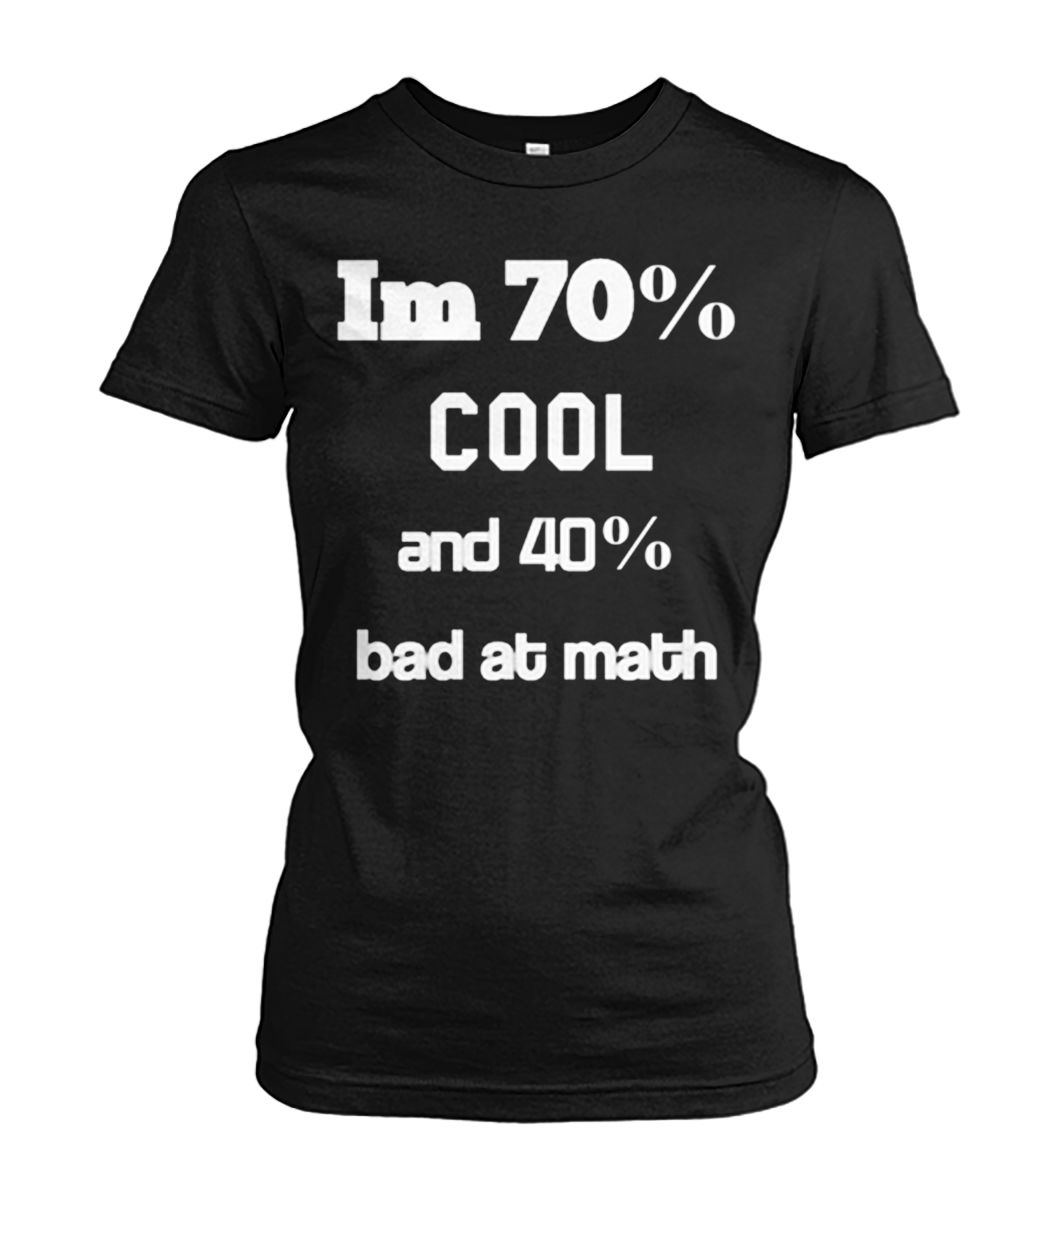 I'm 70% cool and 40% bad at math women's crew tee